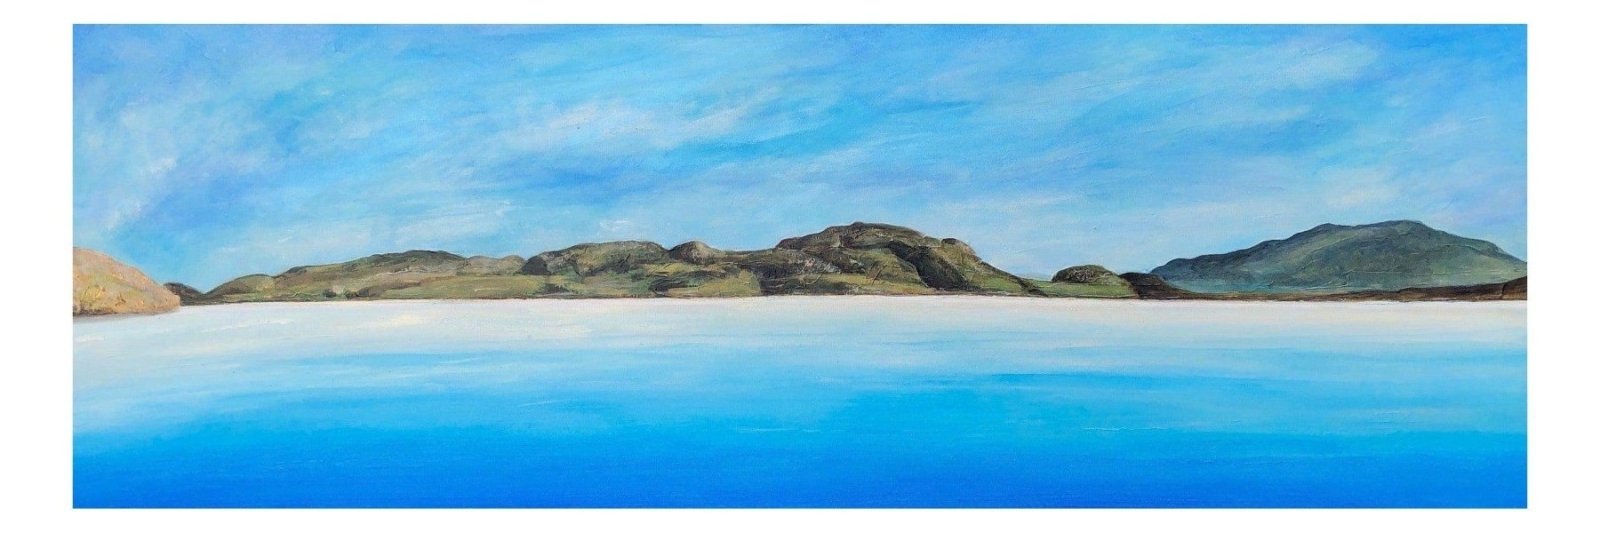 Reef Beach Lewis-Panoramic Prints-Hebridean Islands Art Gallery-Paintings, Prints, Homeware, Art Gifts From Scotland By Scottish Artist Kevin Hunter